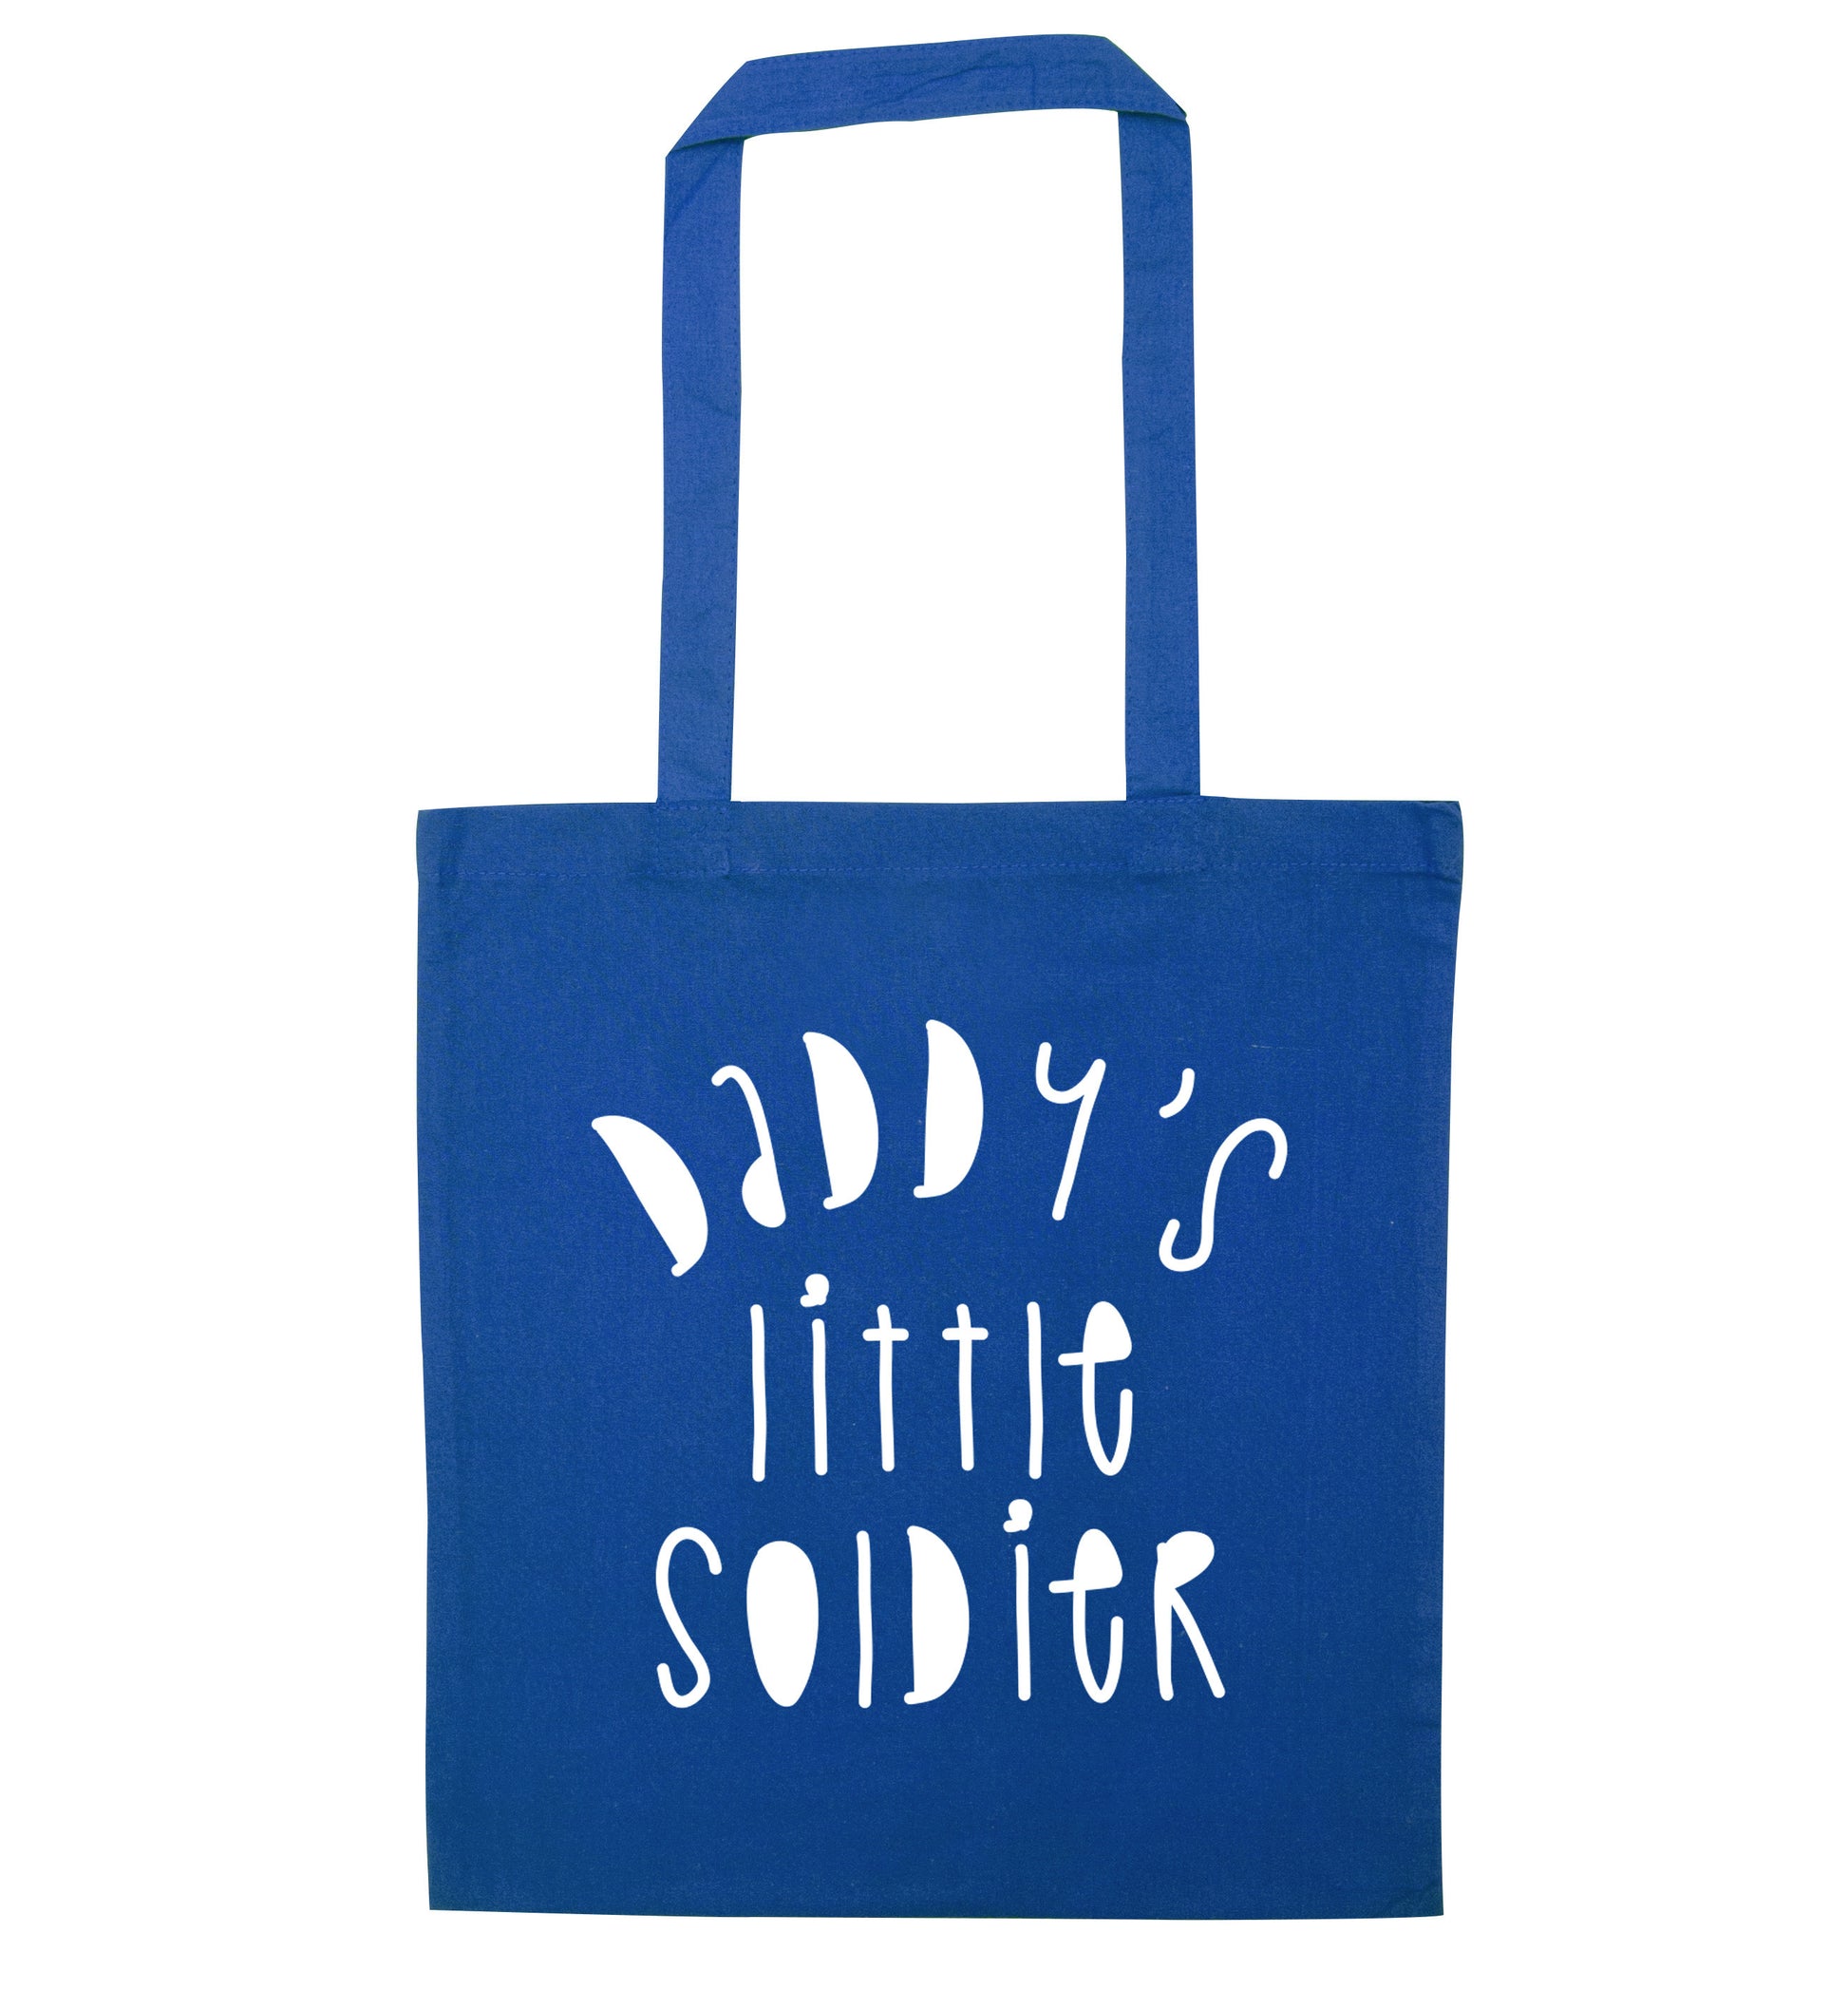 Daddy's little soldier blue tote bag